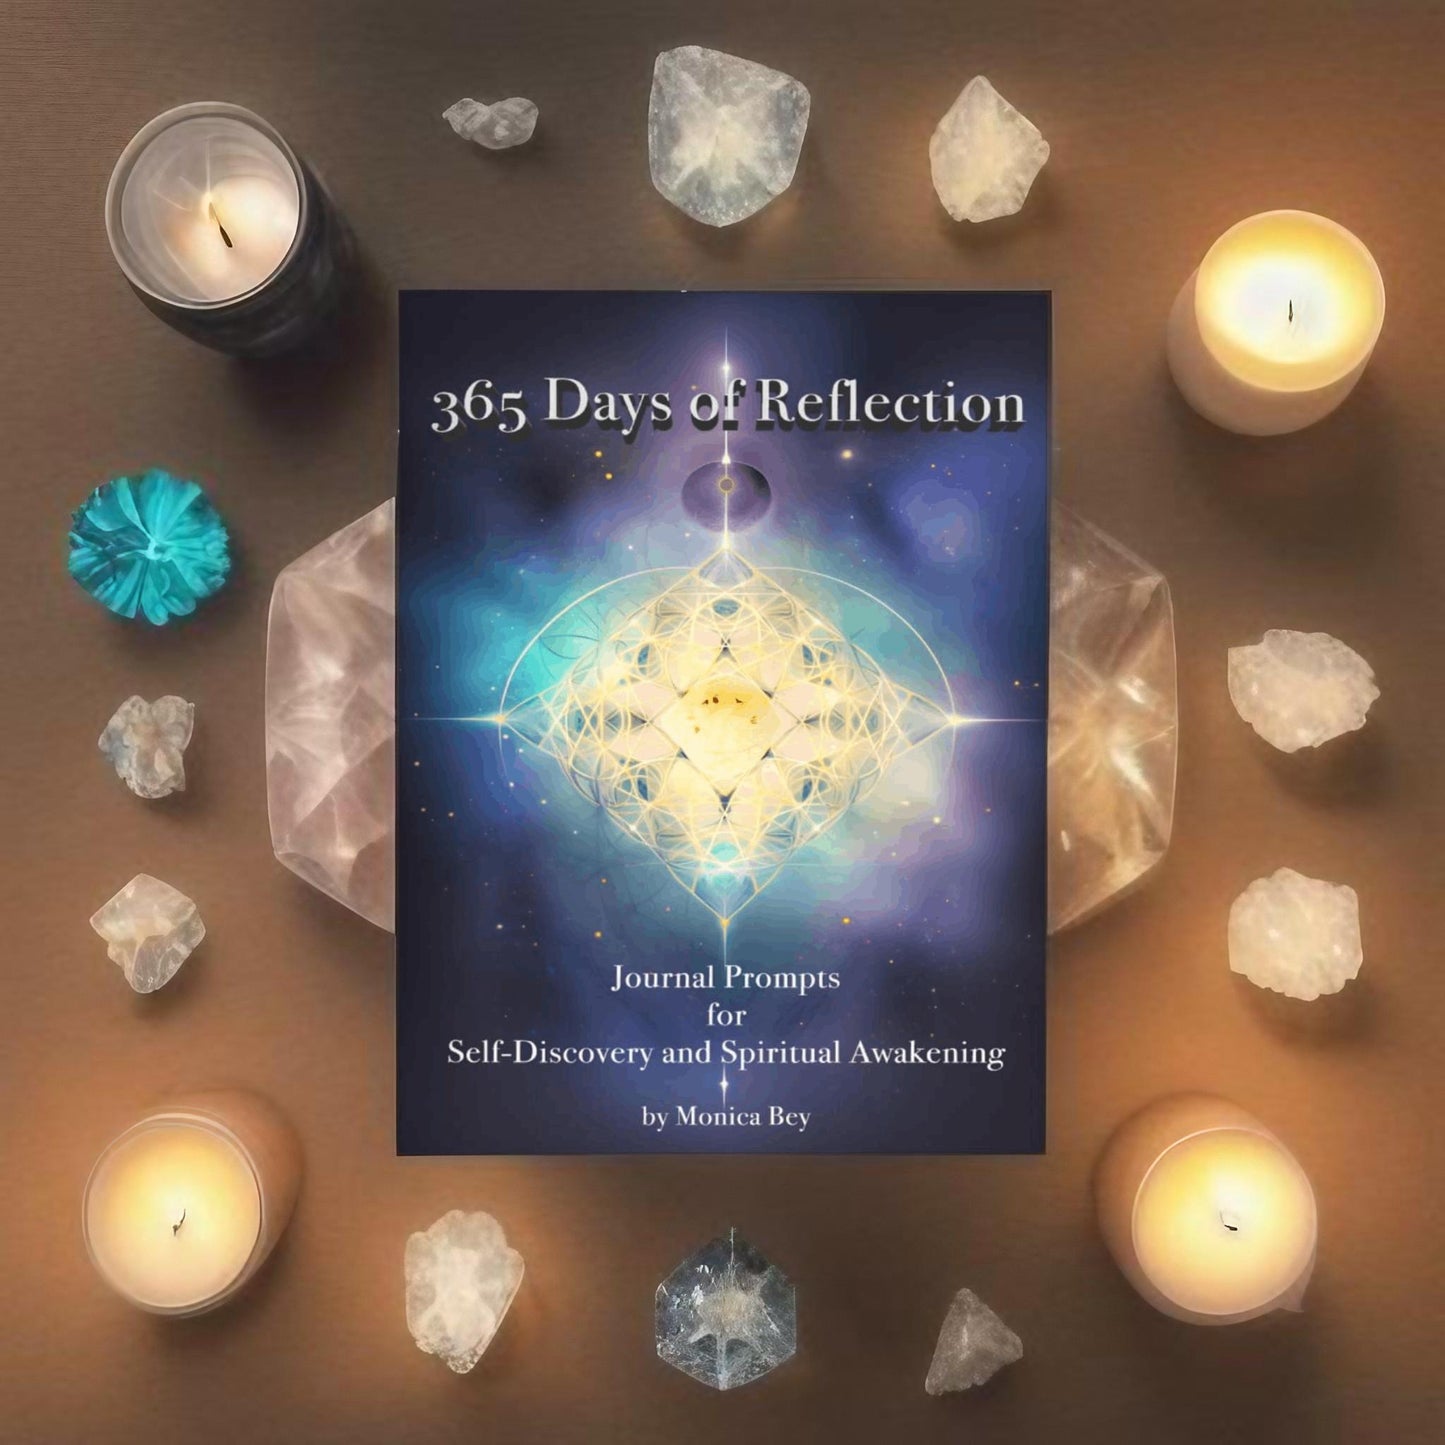 365 Days of Reflection: Journal Prompts for Self-Discovery and Spiritual Awakening